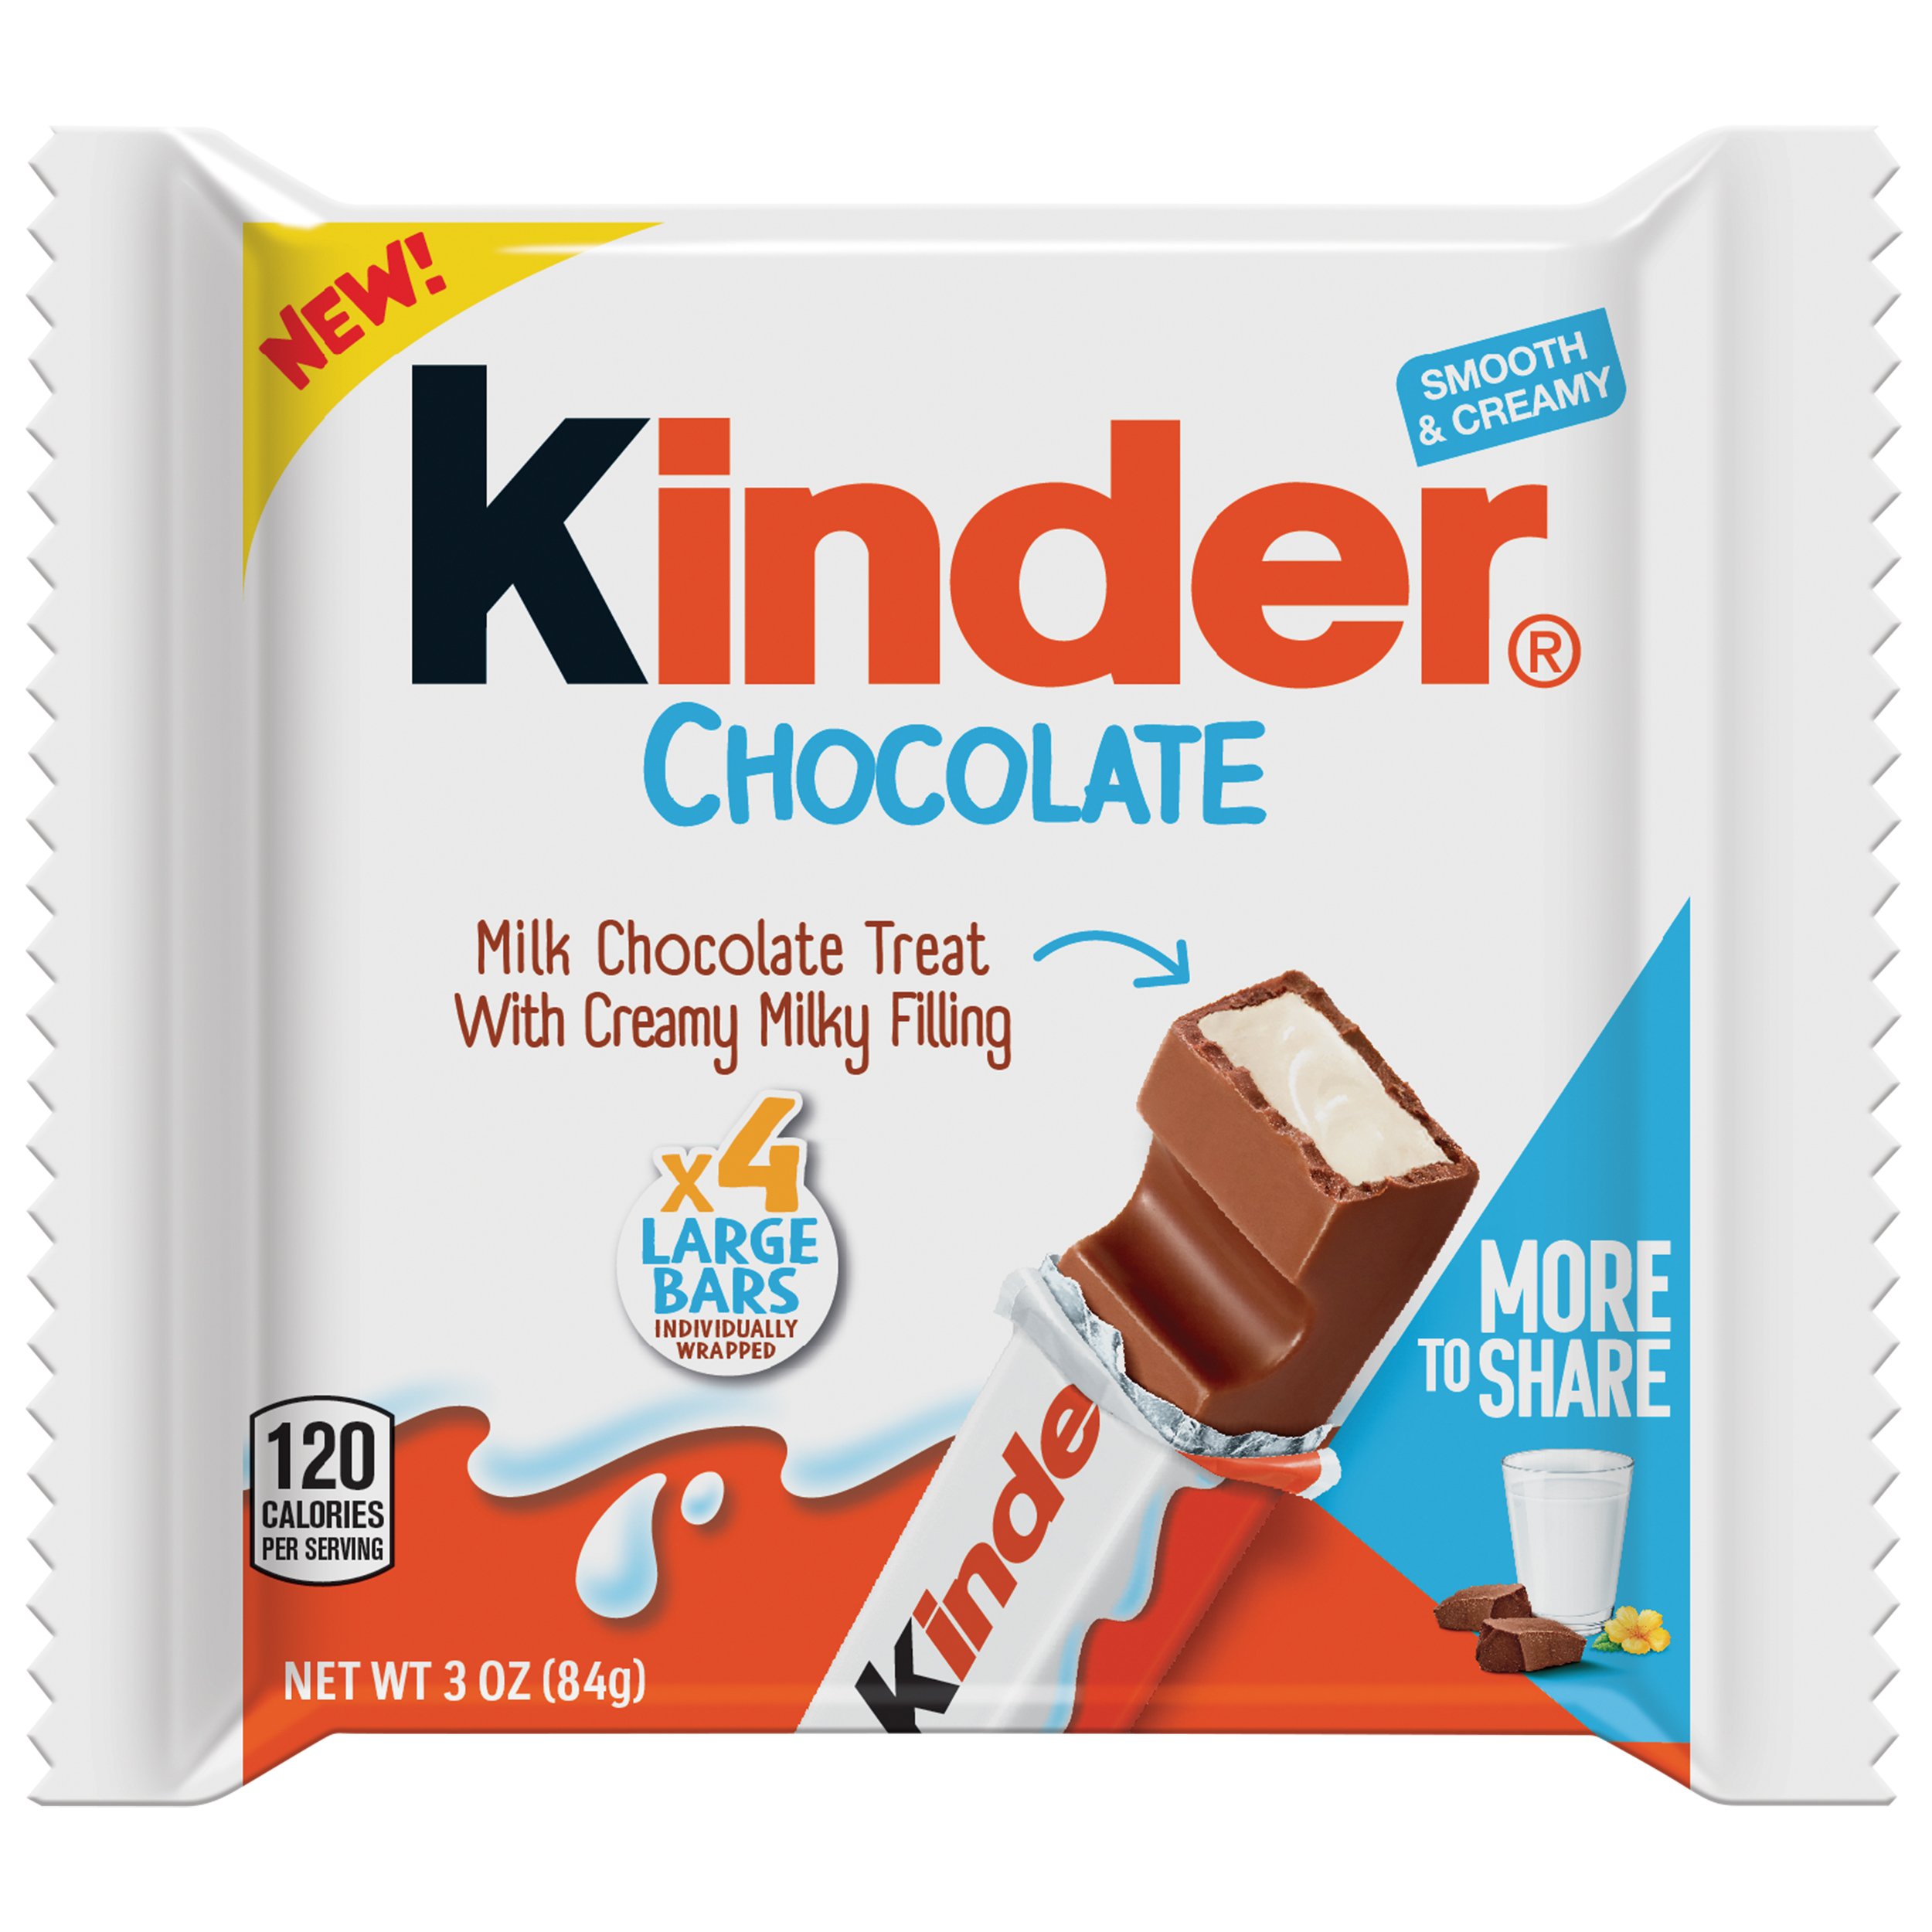 Hershey's Milk Chocolate with Almonds King Size Bar - Shop Candy at H-E-B